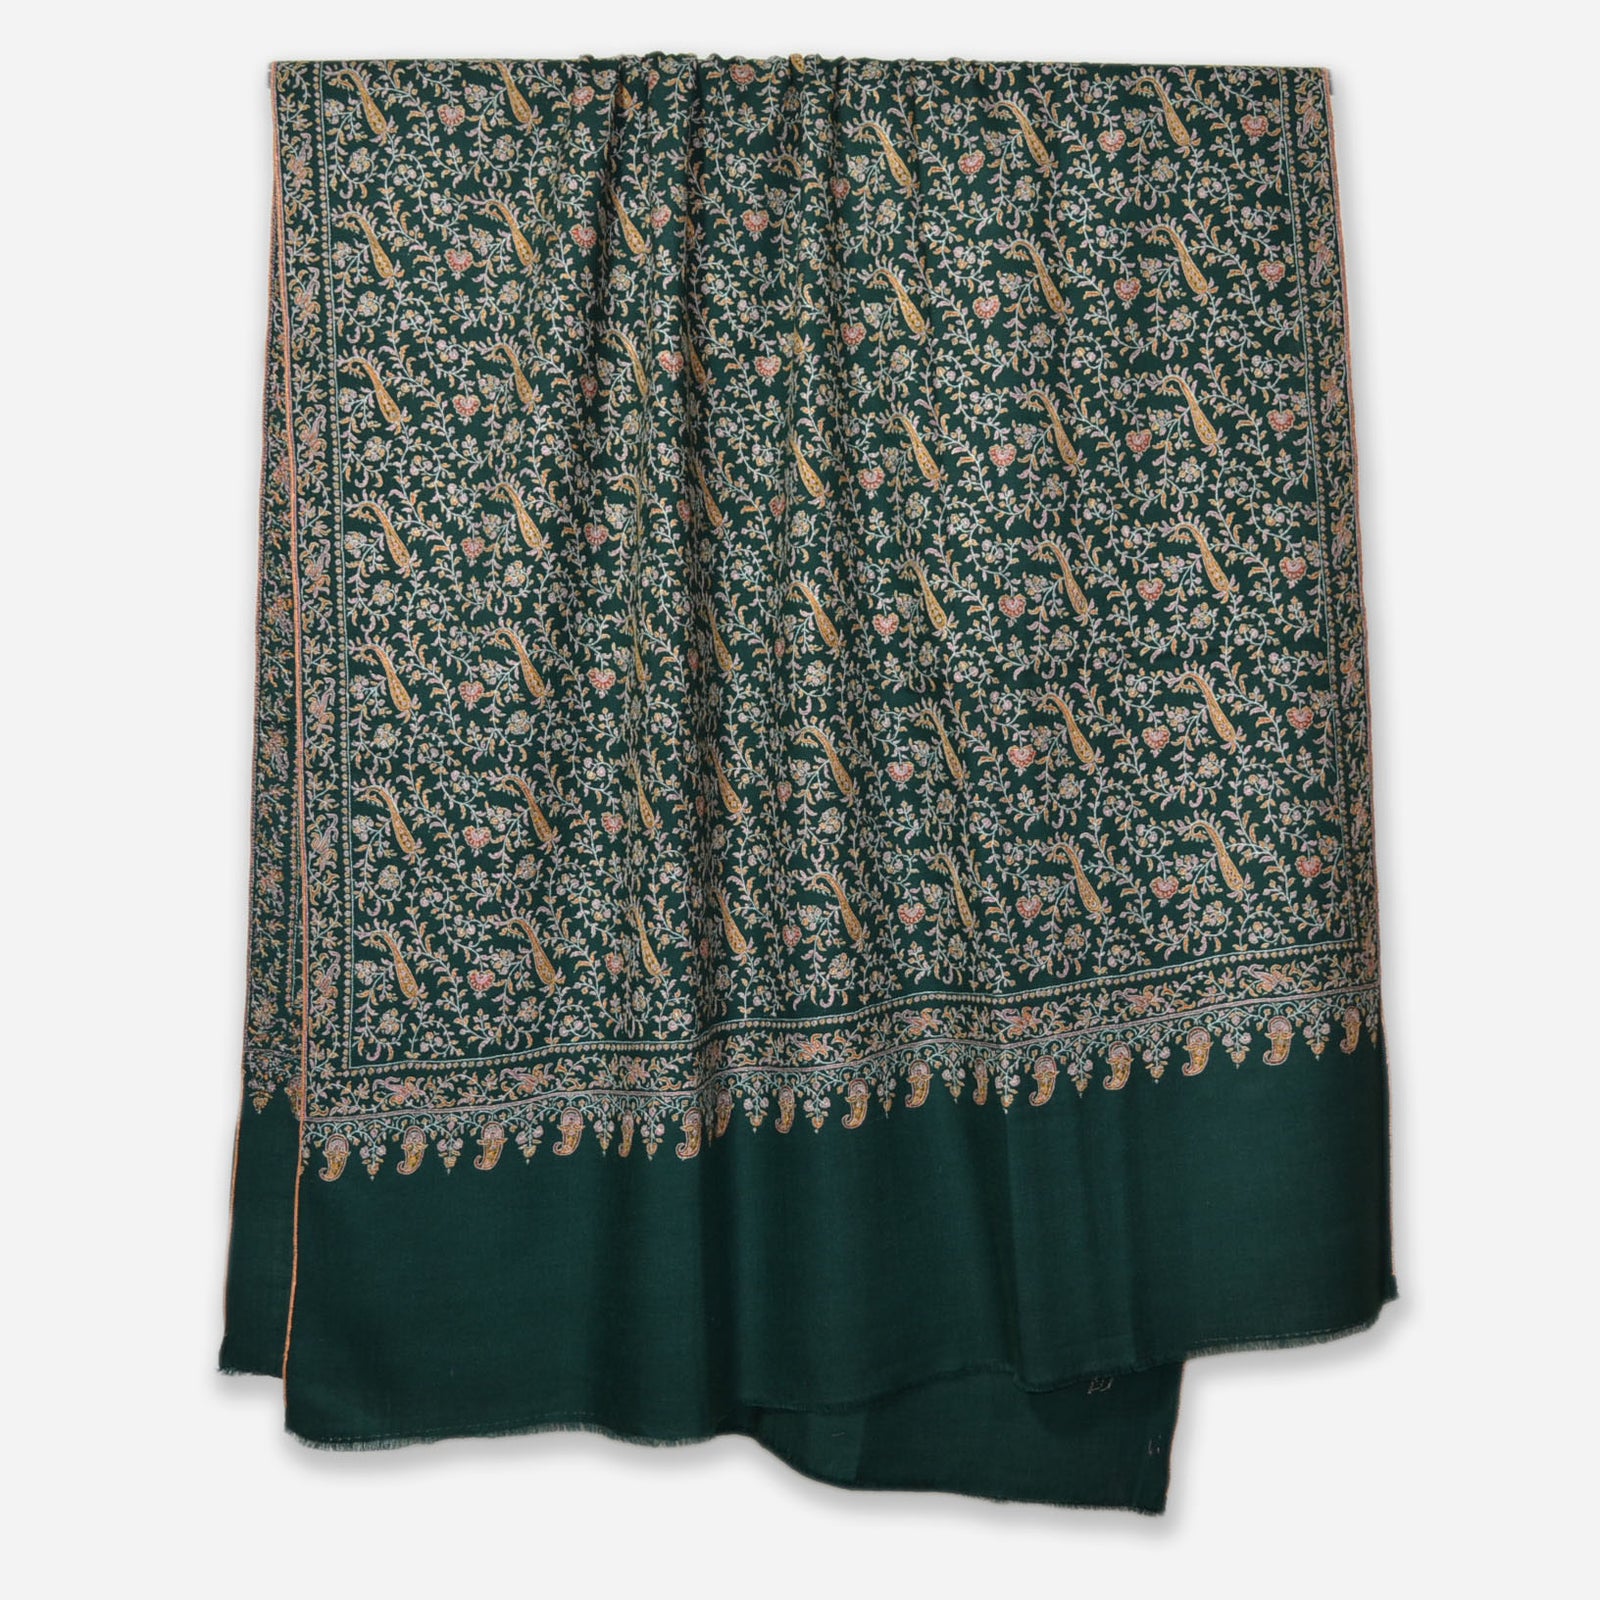 Green Jali Embroidery Cashmere Travel Wrap